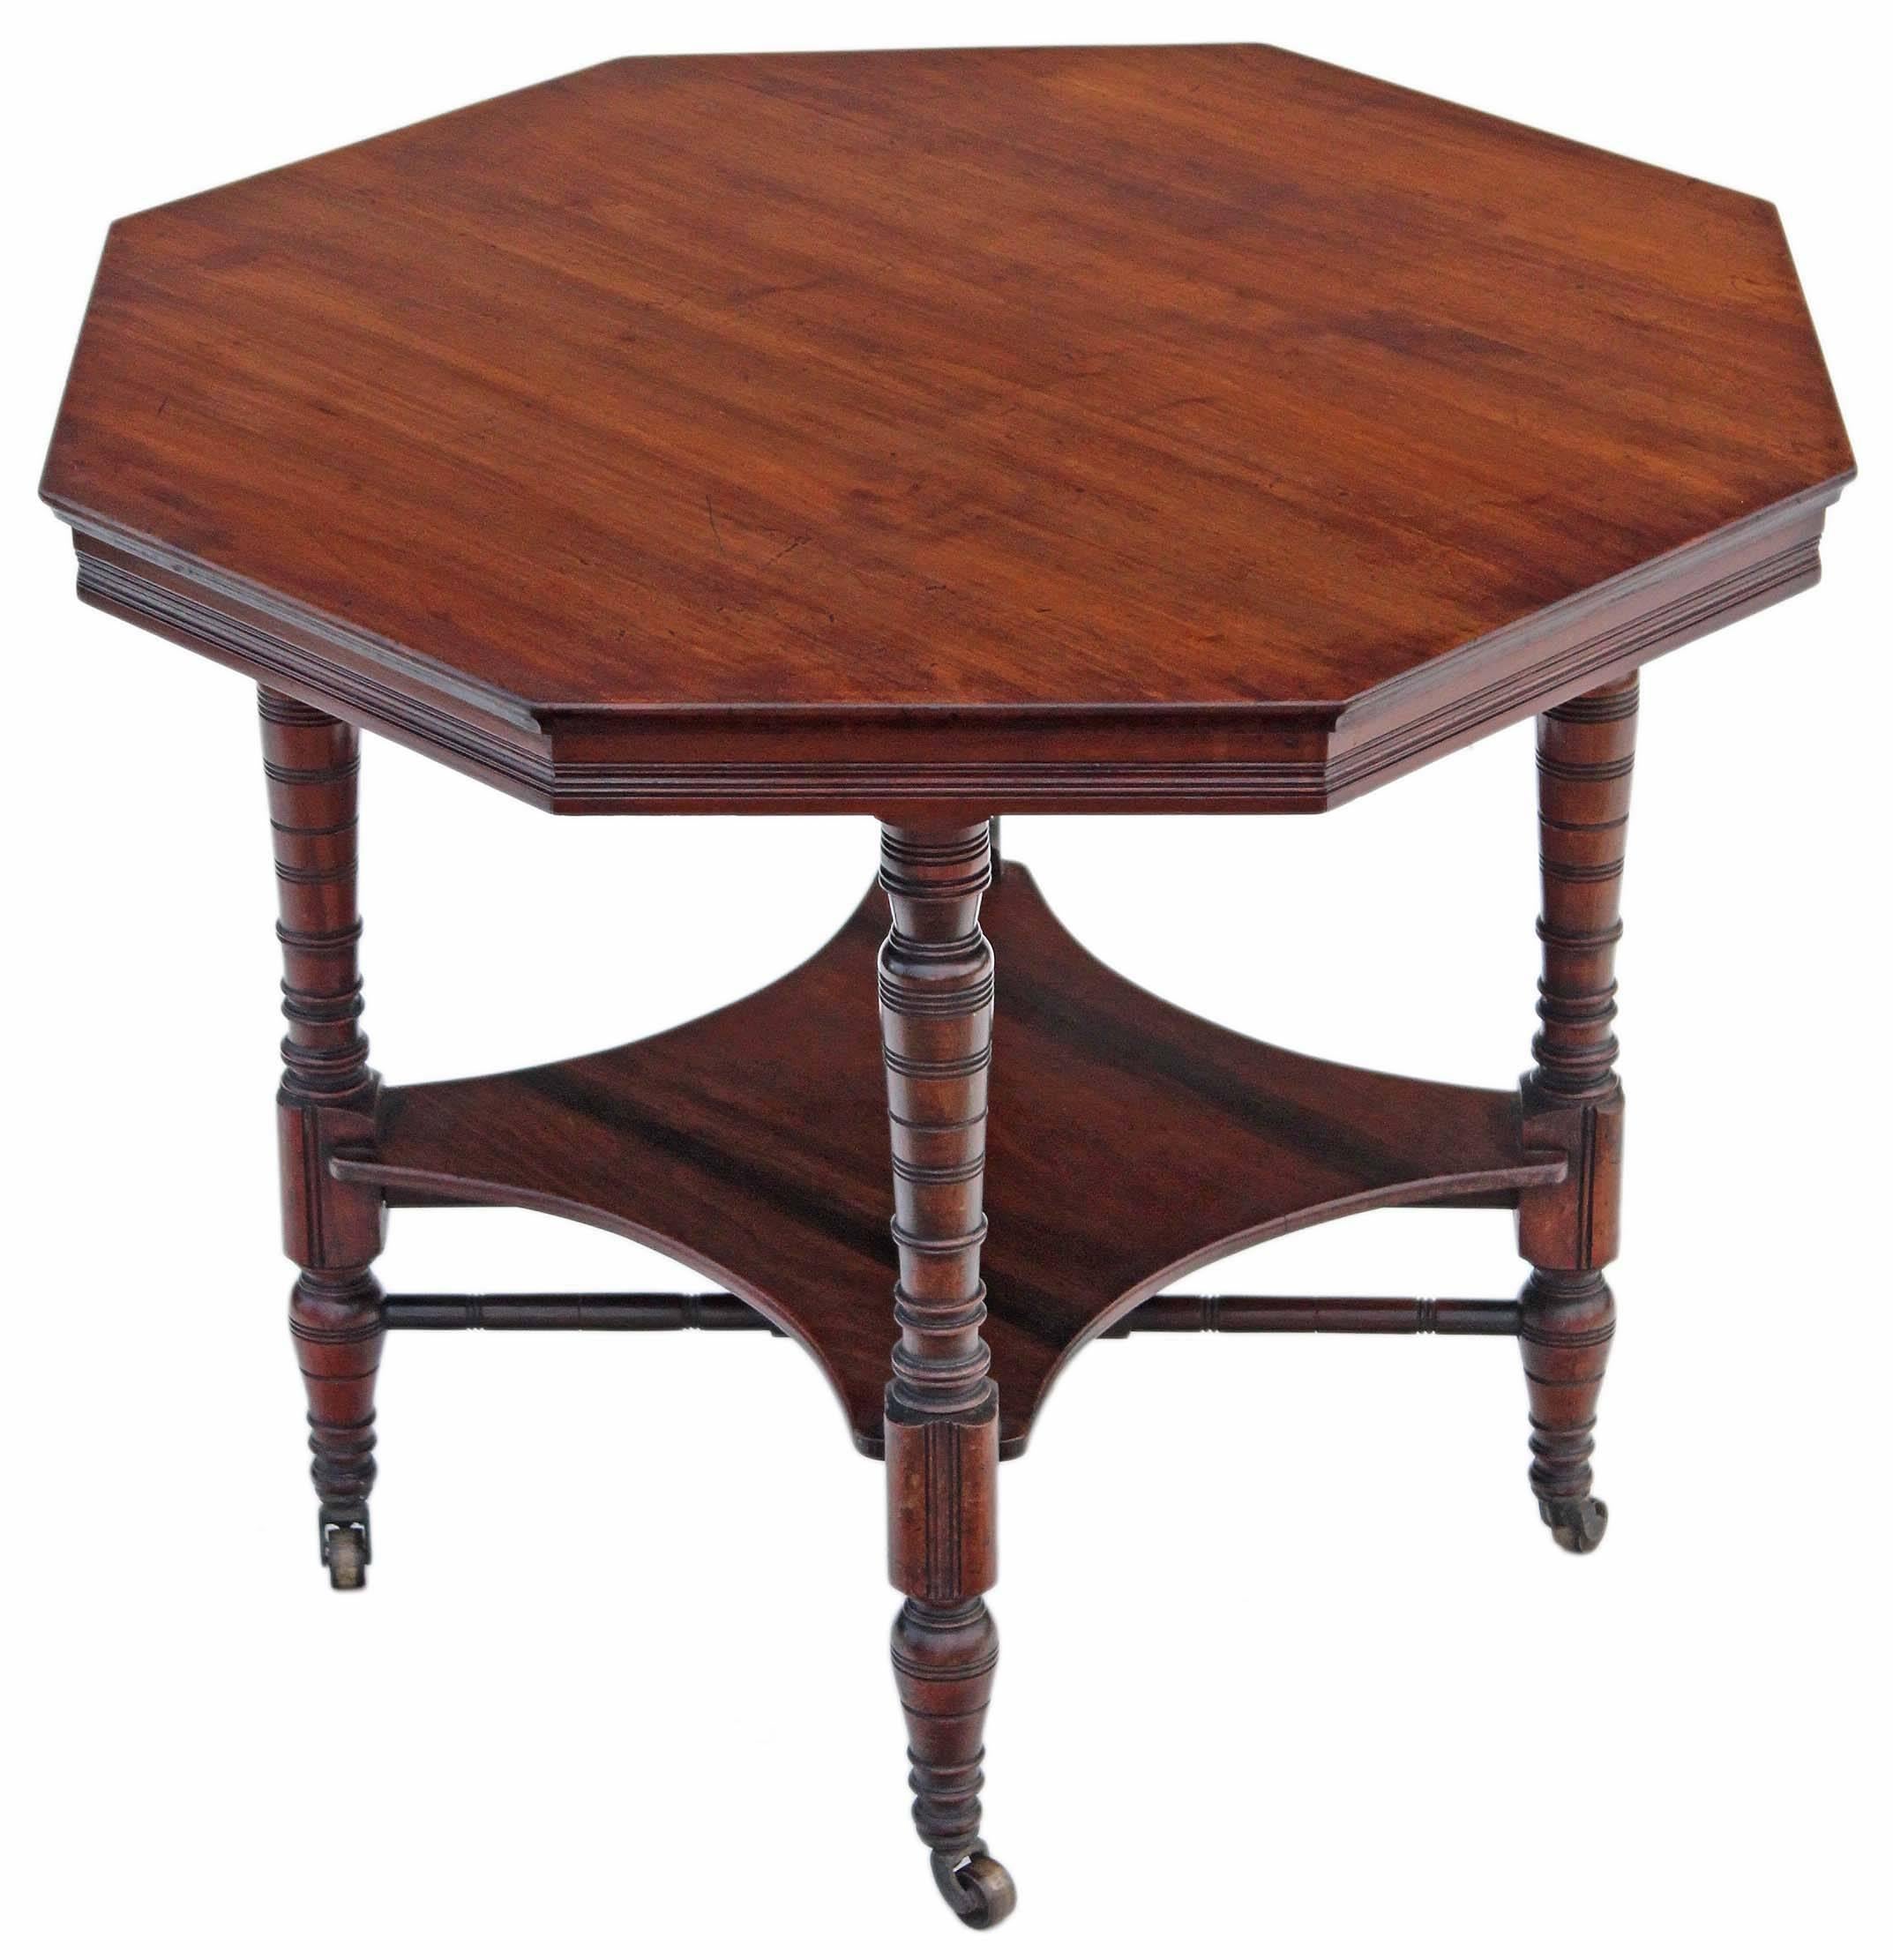 Antique Victorian walnut octagonal centre window side occasional or loo table.

A lovely table, that is full of age, charm and character.

This is a quality, well-made piece, with an attractively shaped under-tier.

Wonderful color and